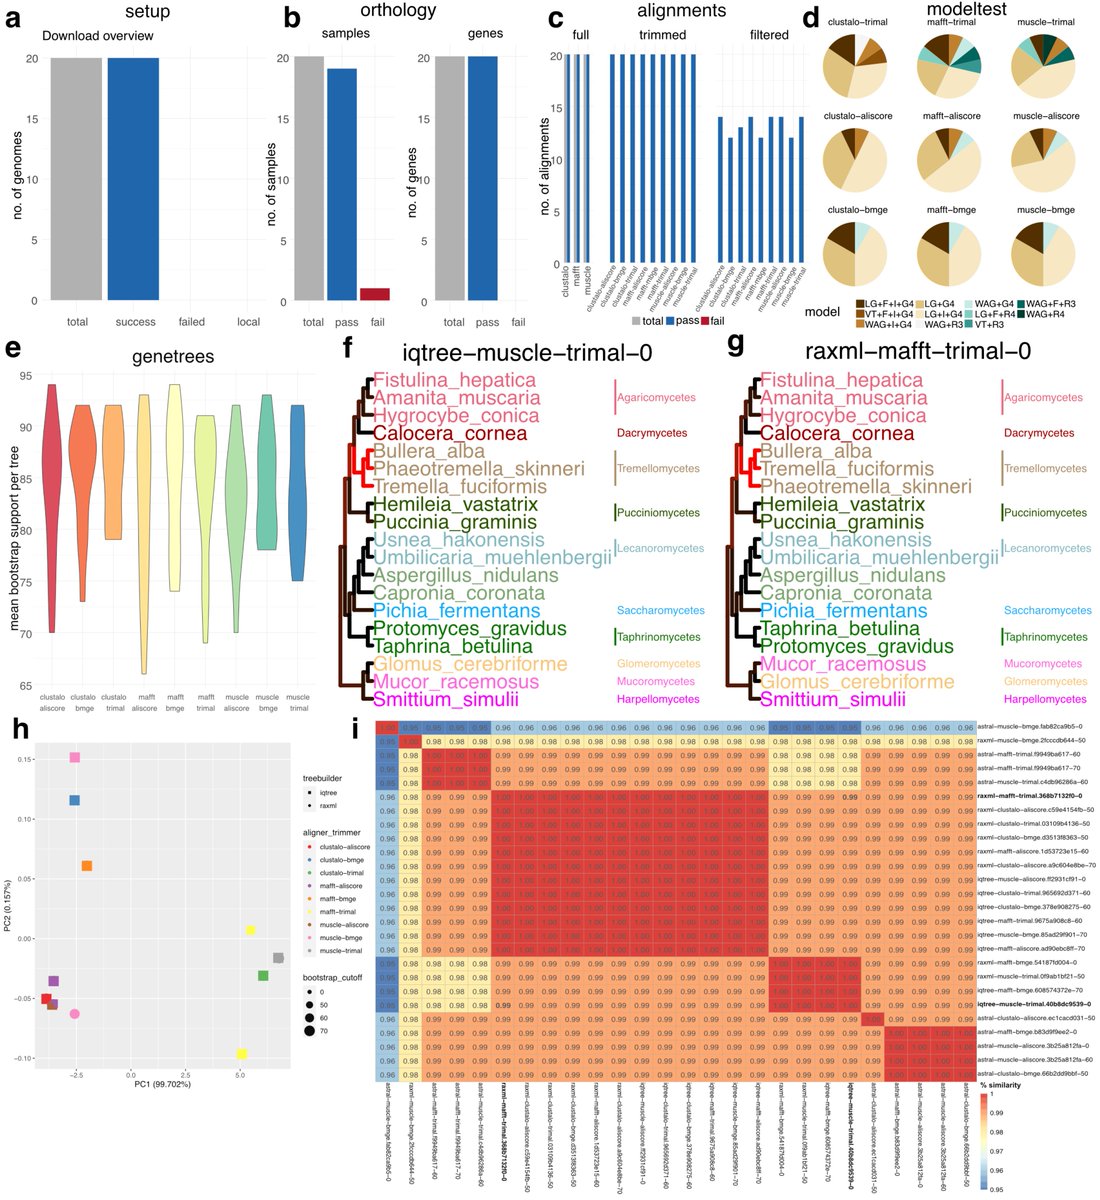 Interested in #phylogenetics using whole #genome/#transcriptome/#proteome data? @C__Hahn and I are very happy to share phylociraptor with you: It facilitates explorative and reproducible phylogenomic analyses of thousands of genes and genomes. Preprint: tinyurl.com/yc4f7v6d